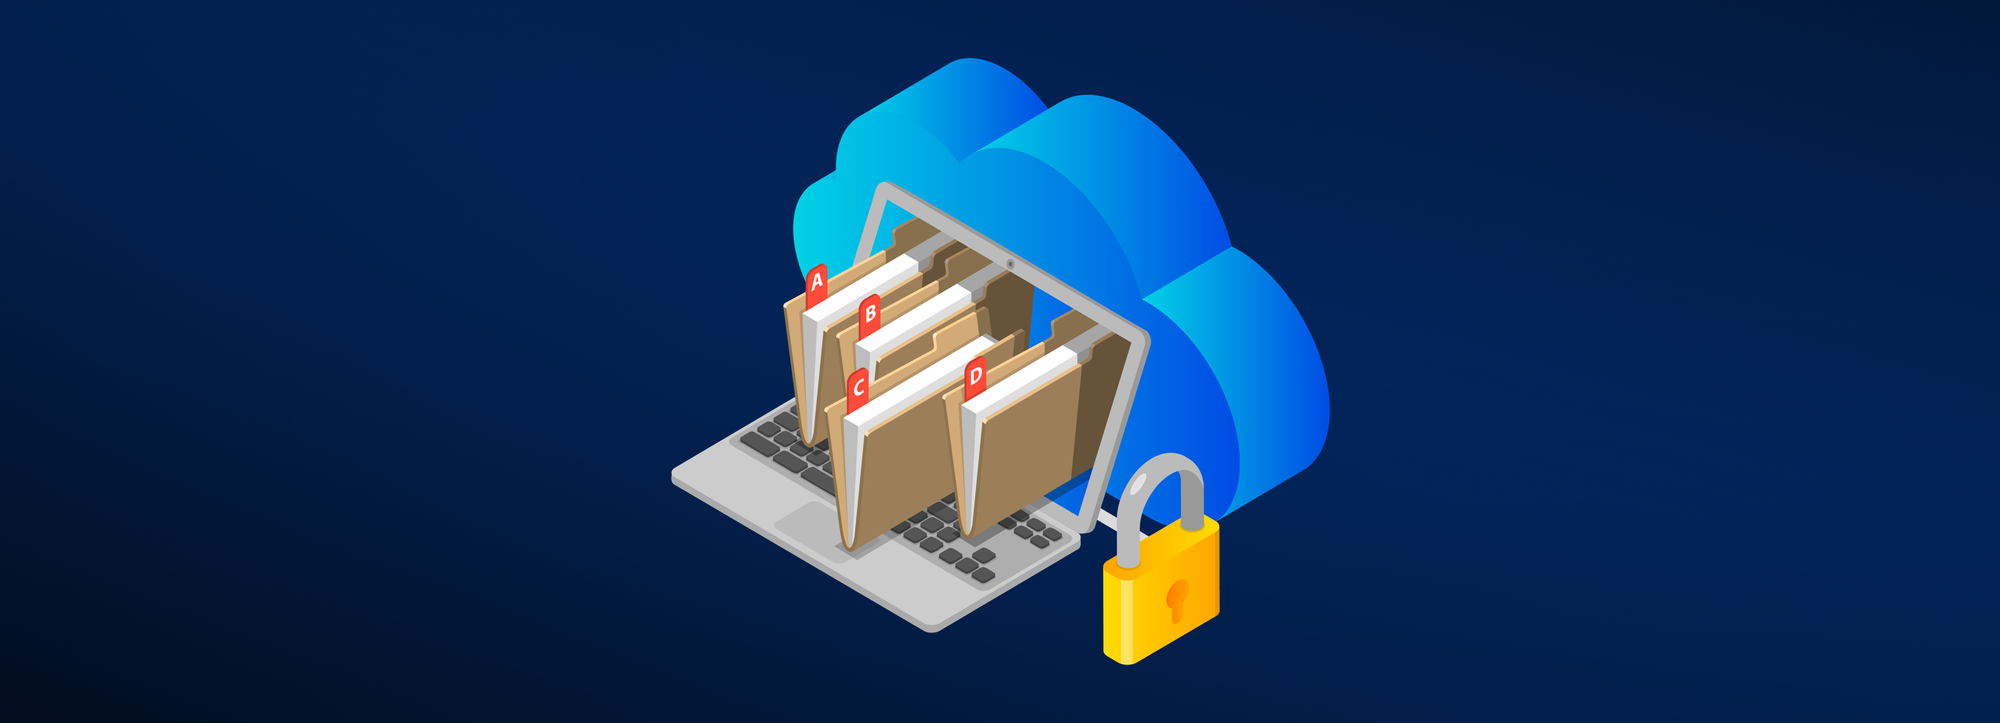 files in the cloud